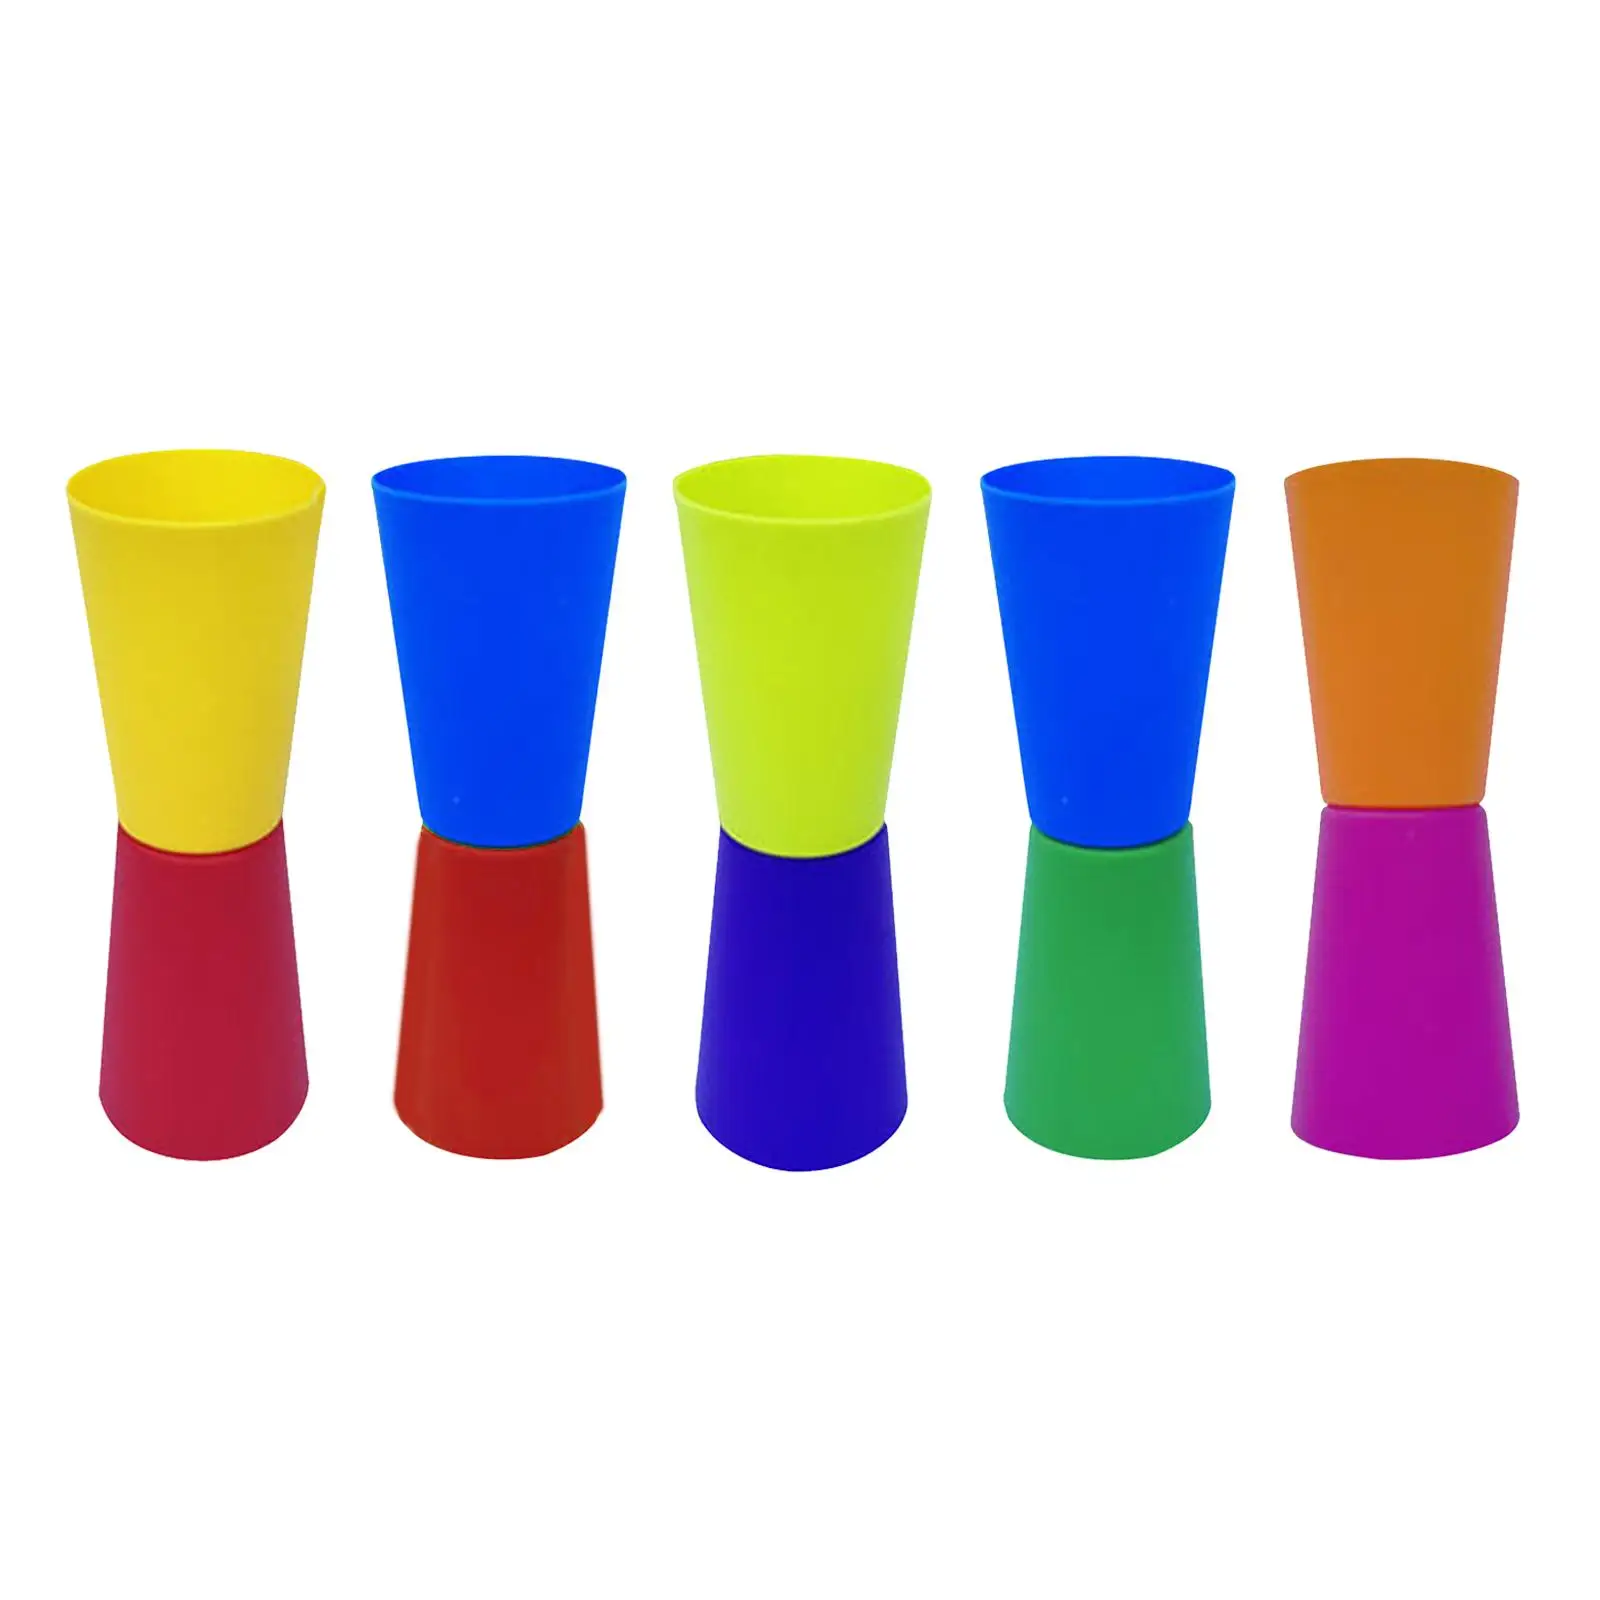 10x Flip Cups Agility Training Body Coordination Sensory Integration Exercise Aid for Rugby Football Basketball Outdoor with Net